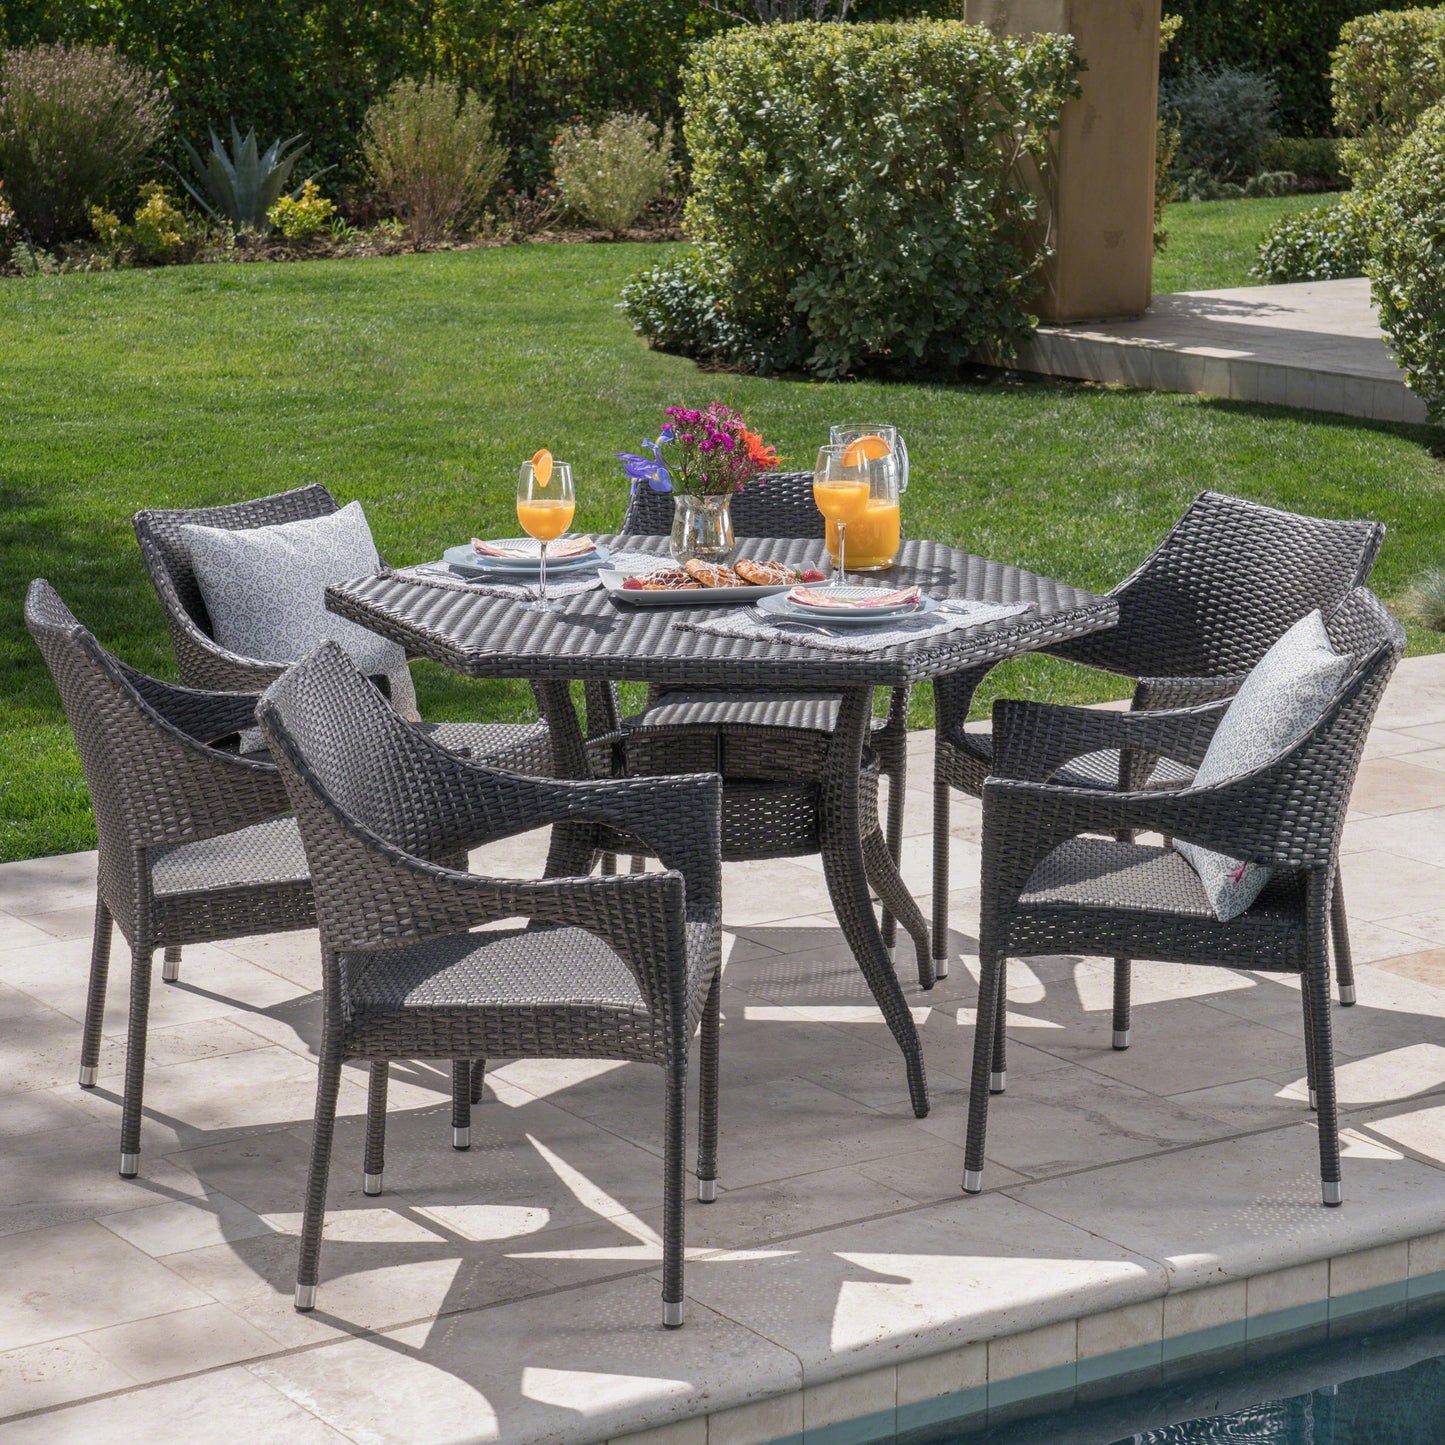 Rosy Outdoor 7 Piece Wicker Hexagon Dining Set with Stacking Chairs